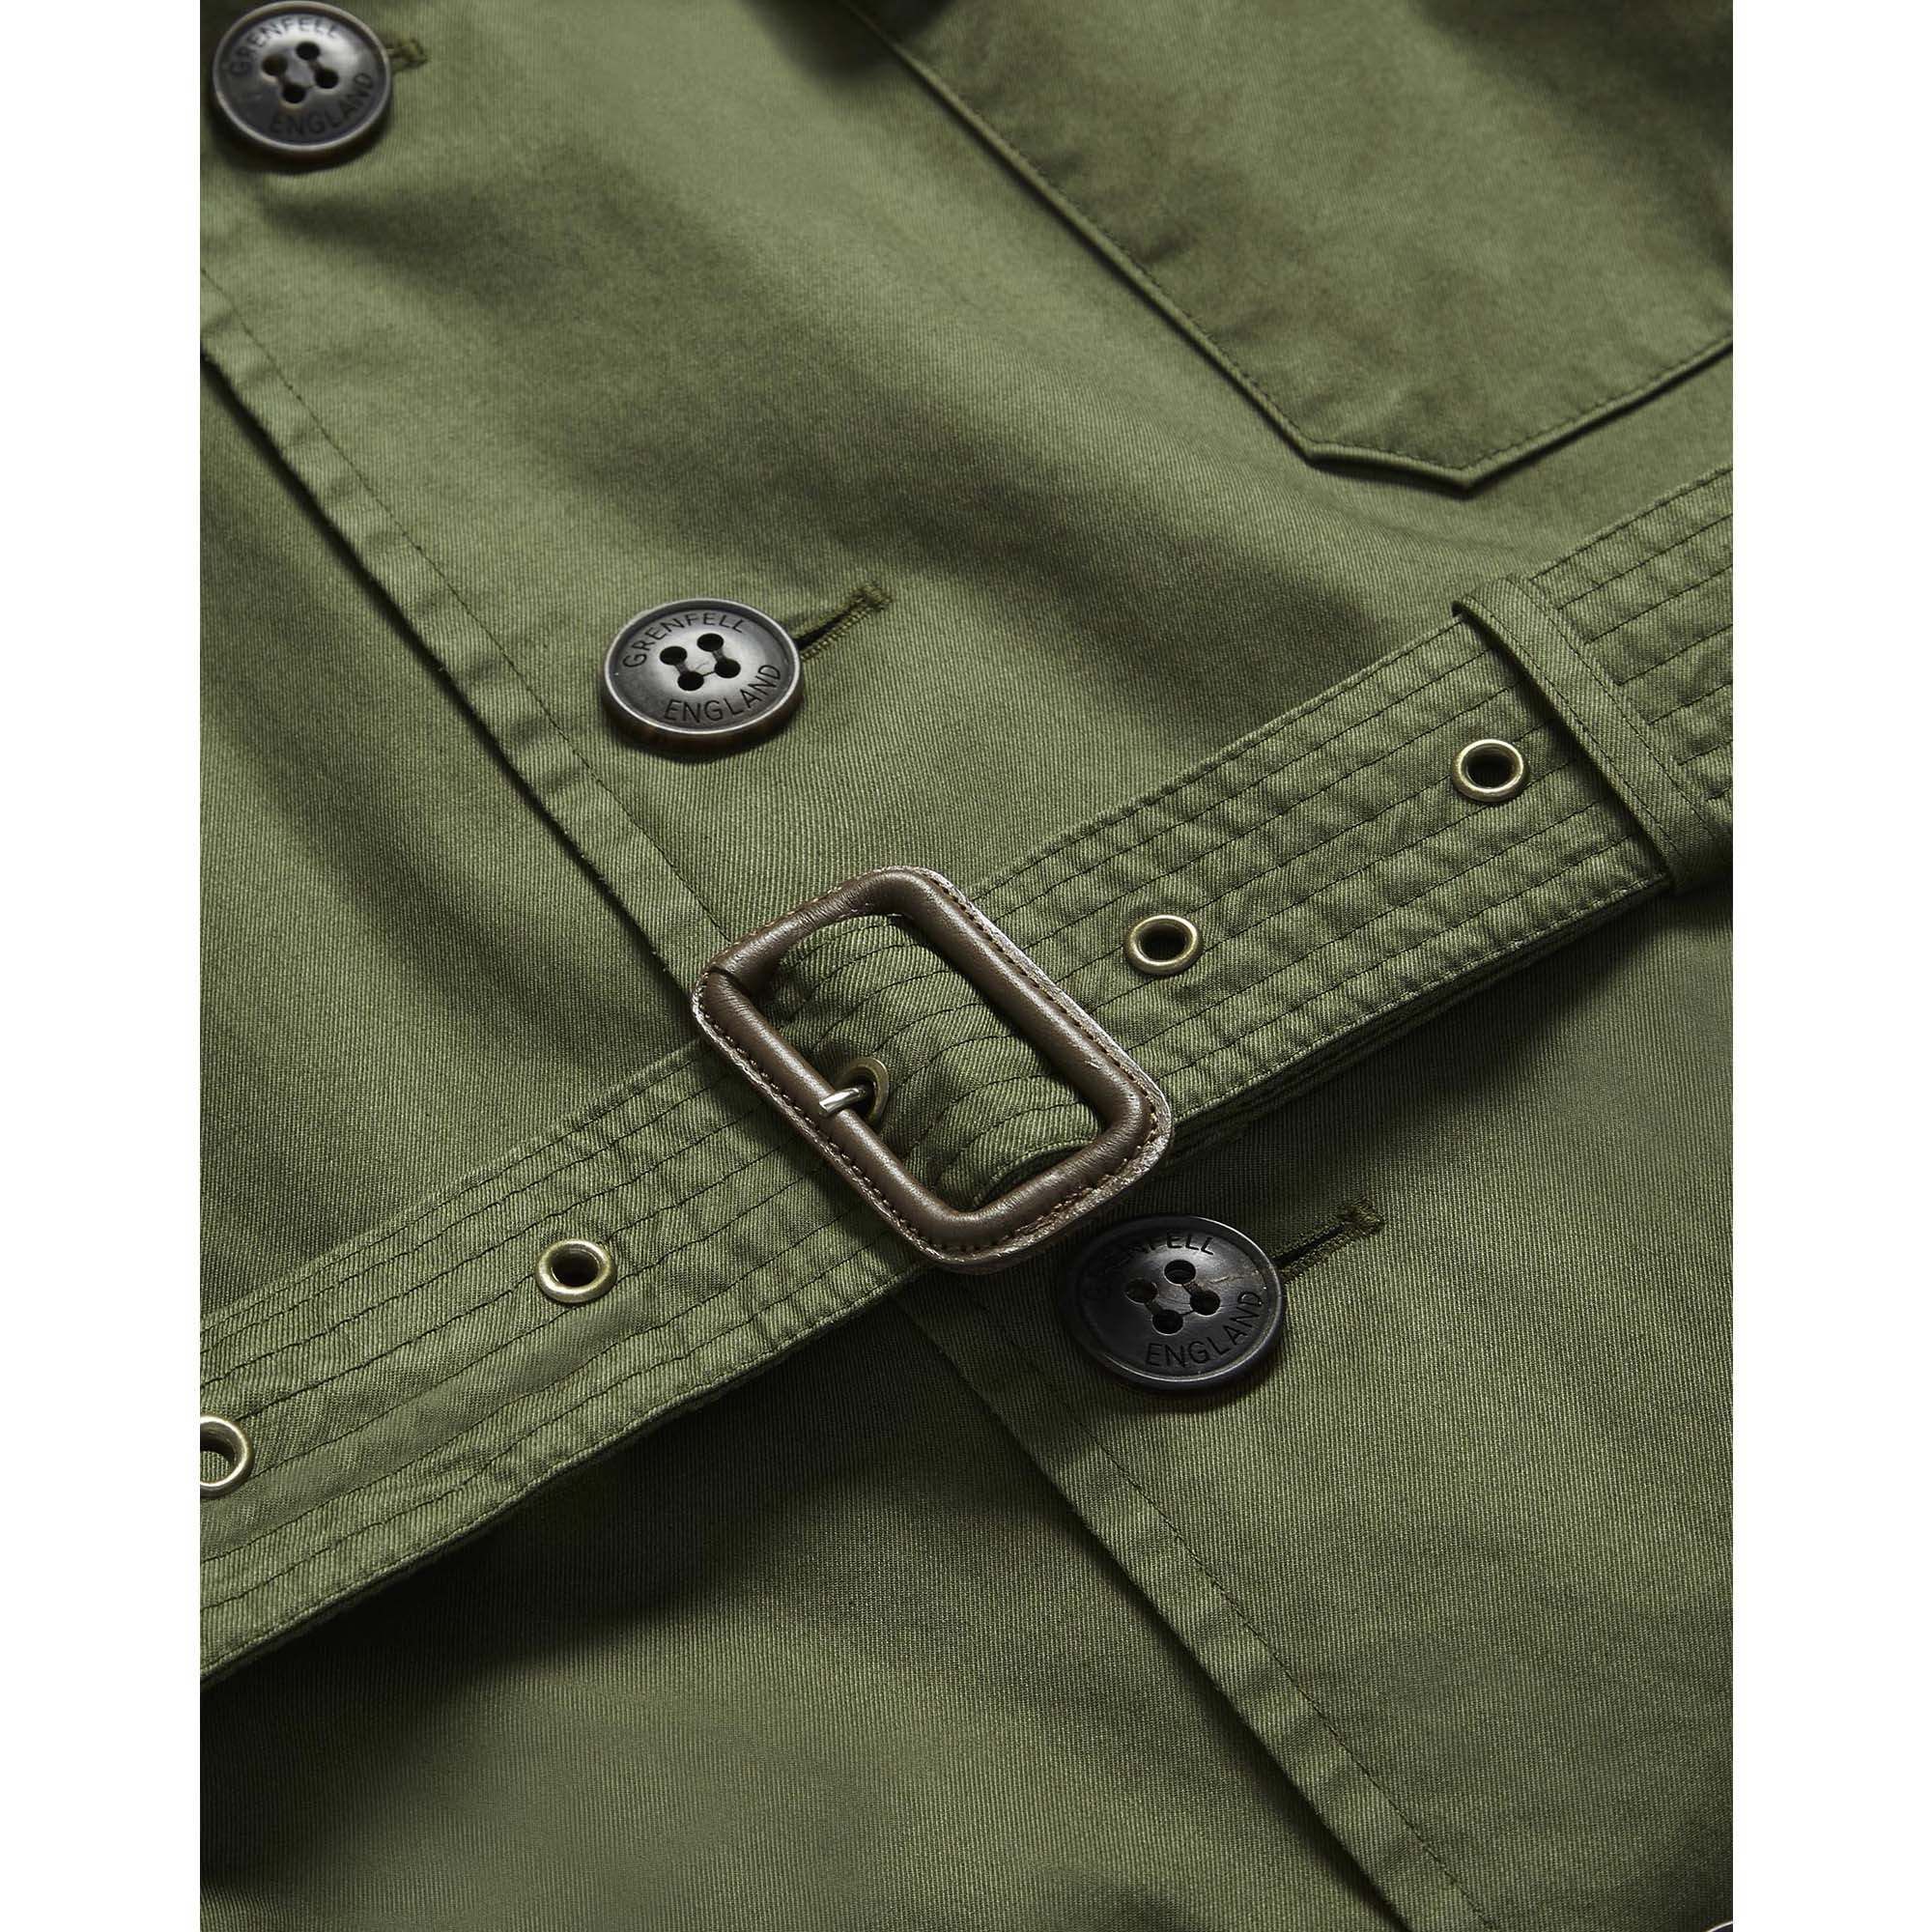 Grenfell Shooting Jacket | Men's Country Clothing | Cordings US